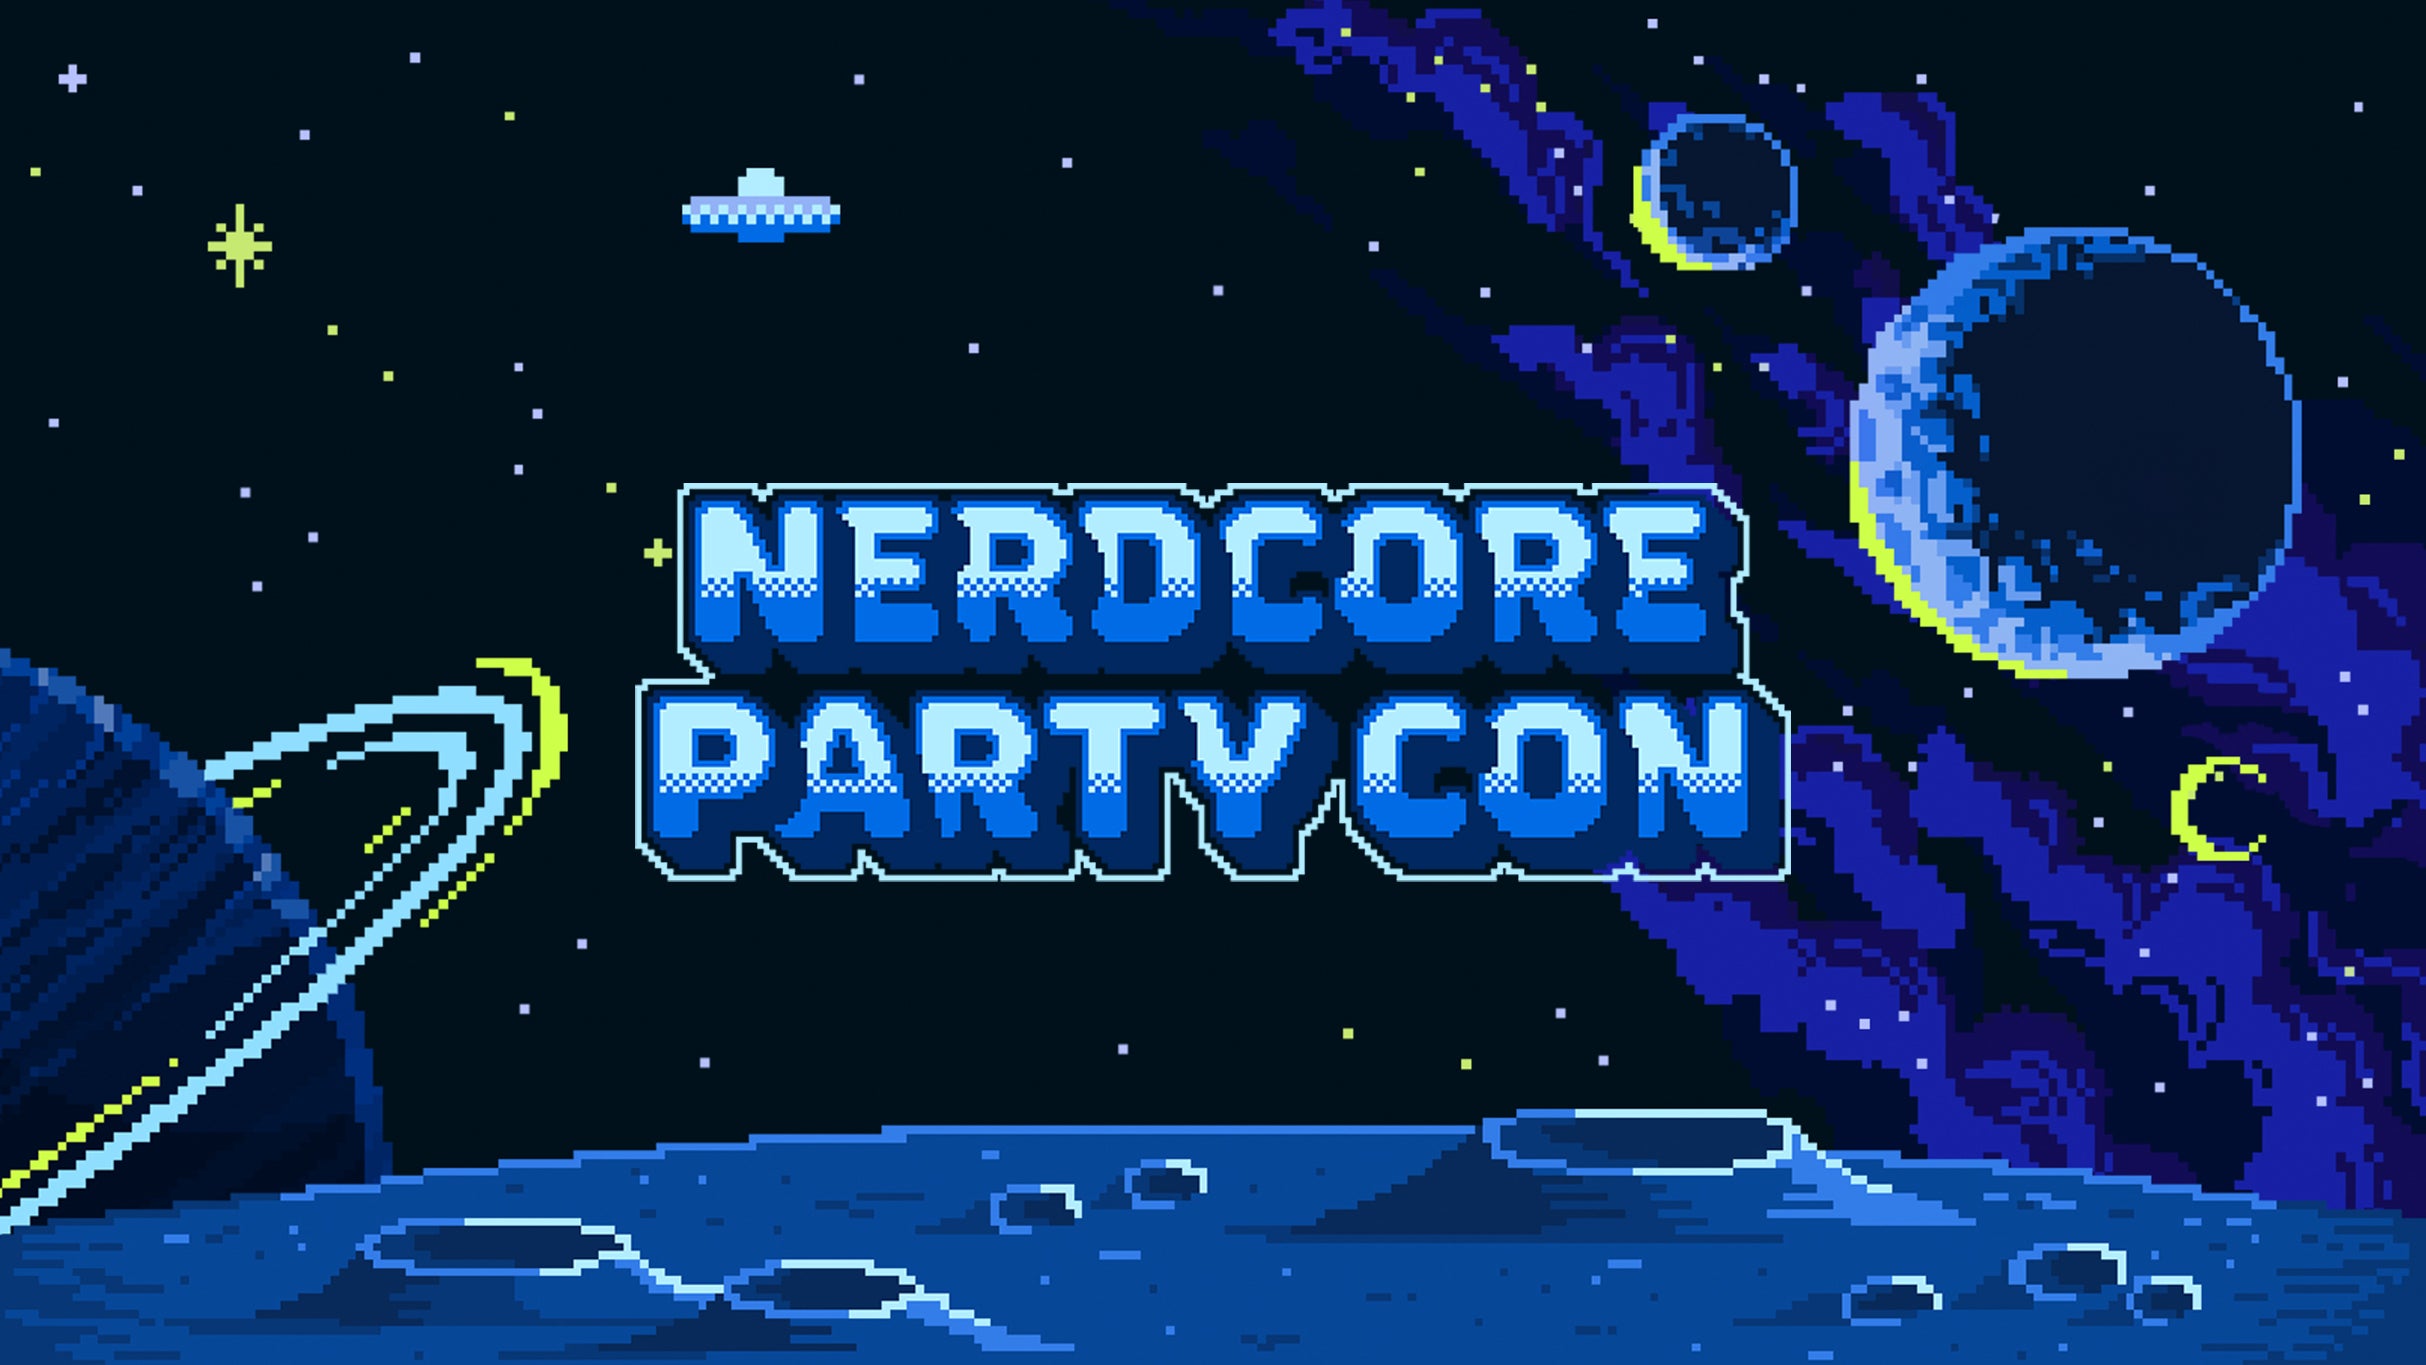 SINGLE DAY TICKET - Nerdcore Party Convention at The Ritz